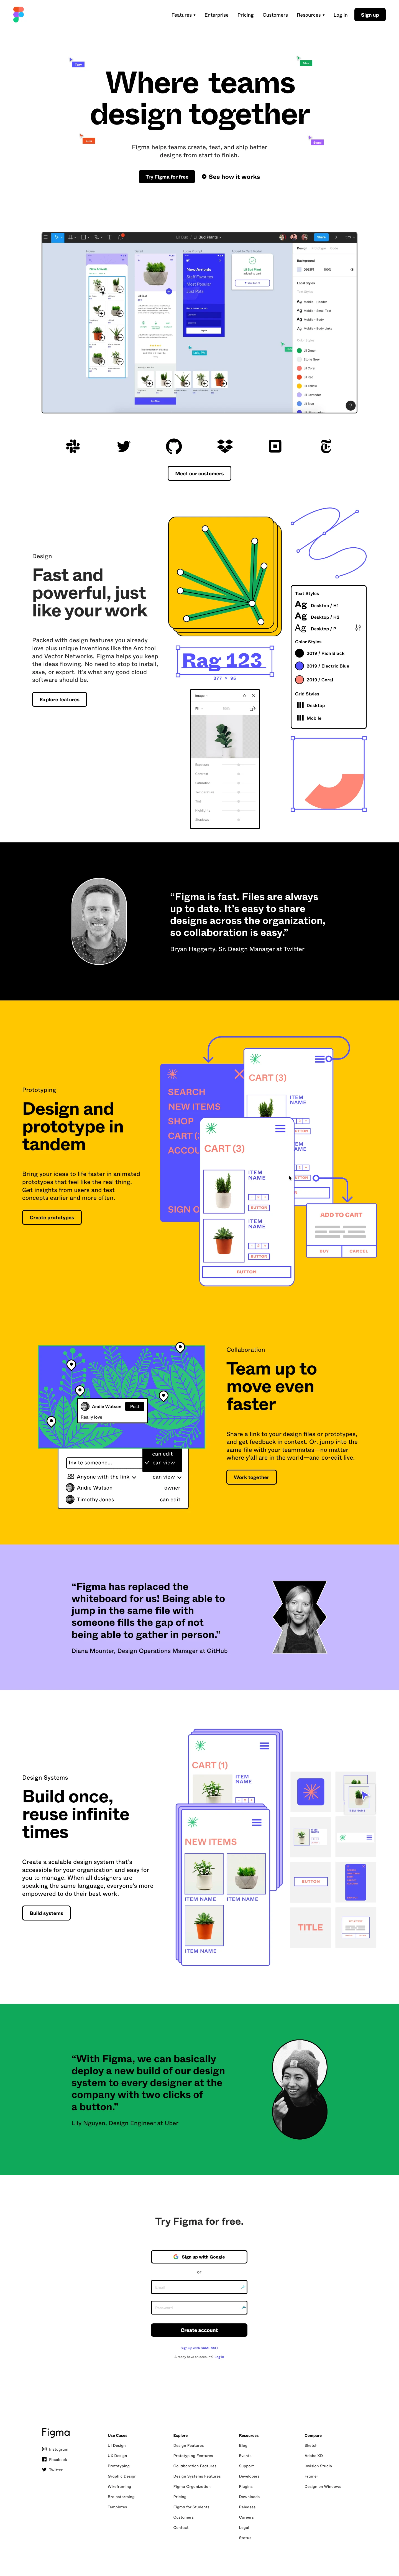 Figma Landing Page Example: The collaborative interface design tool. Figma helps teams create, test, and ship better designs from start to finish.